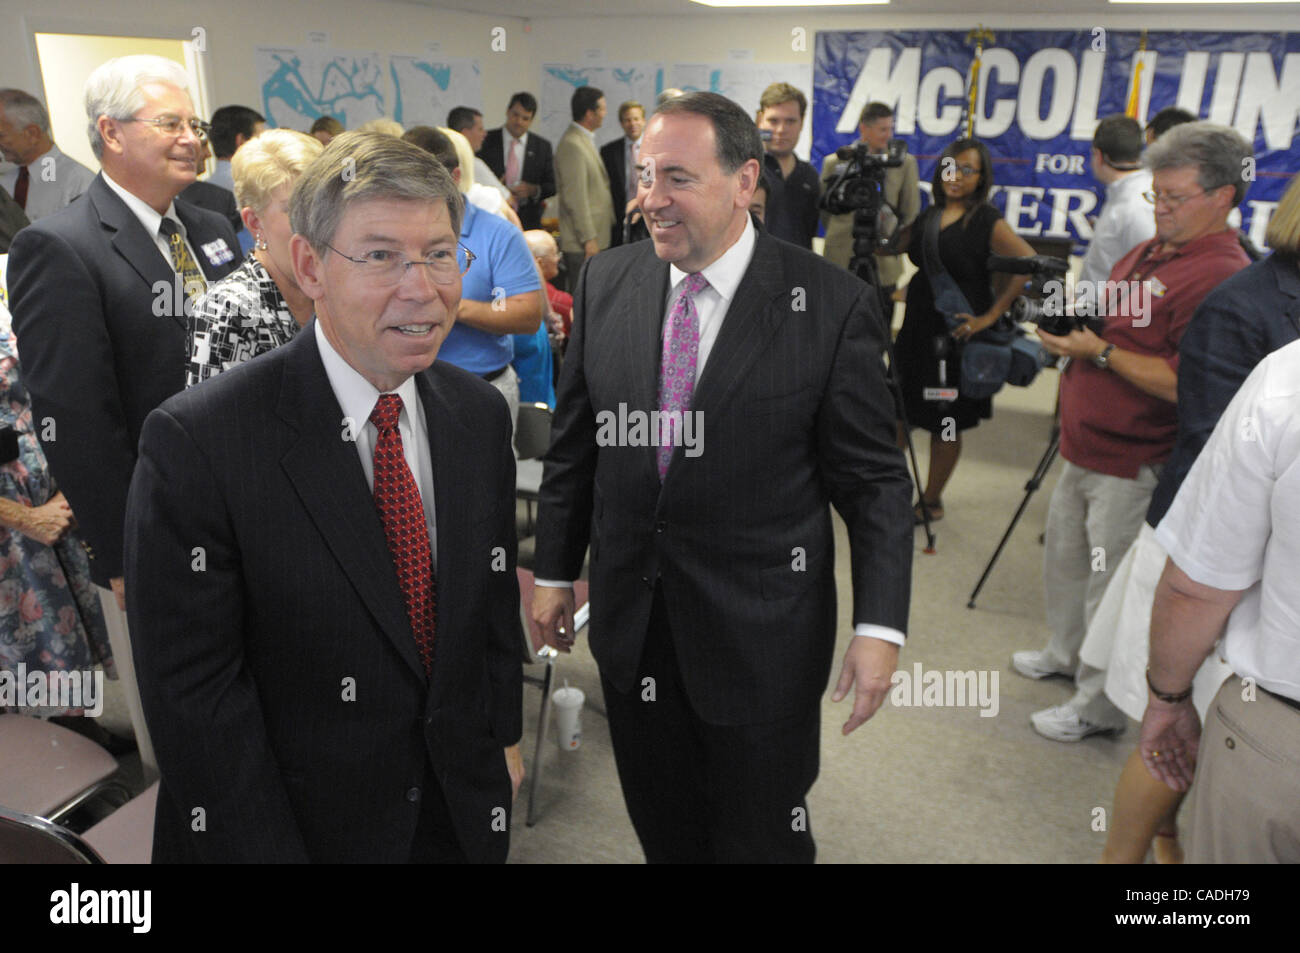 Aug 22, 2010 - Jacksonville, Florida, U.S. - Former Arkansas governor and presidential candidate MIKE HUCKABEE, center, helps Republican candidate for Florida governor BILL McCOLLUM, left, stump for votes at a campaign stop in Jacksonville, Florida, August 22, 2010.  (Credit Image: © Phelan Ebenhack Stock Photo